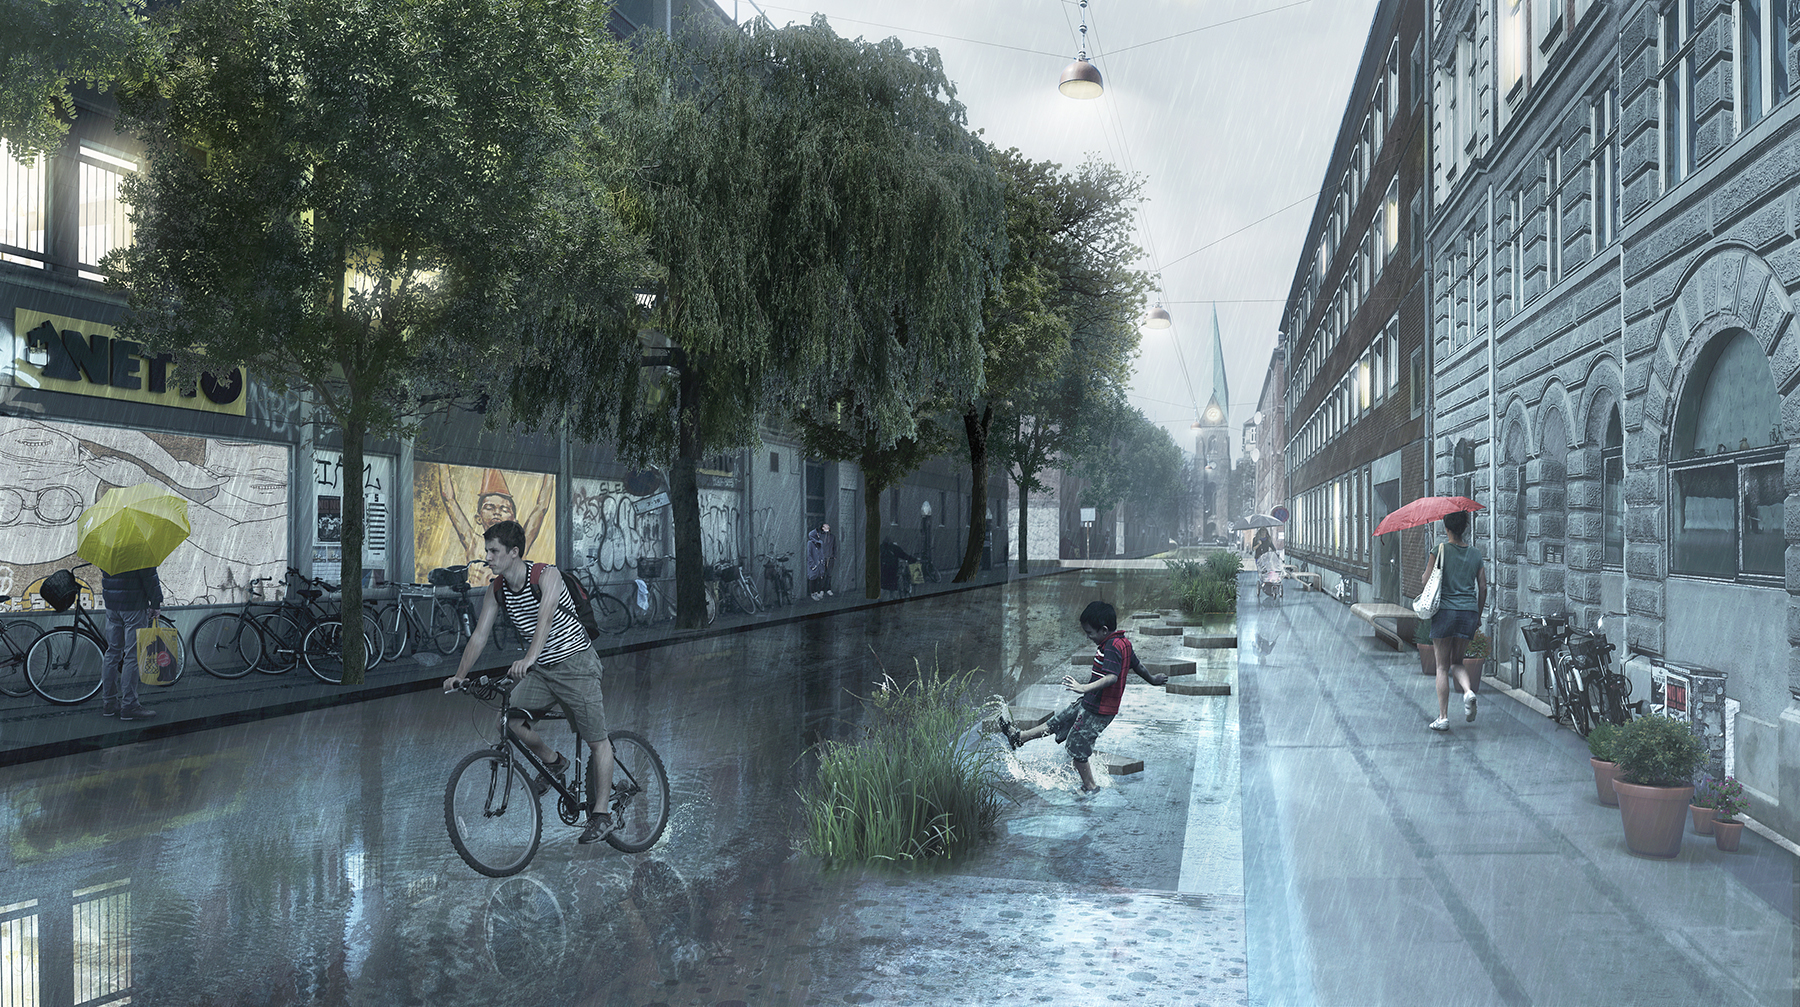 Korsgade street during rainfall. (Image by © Beauty and the Bit, courtesy of SLA)